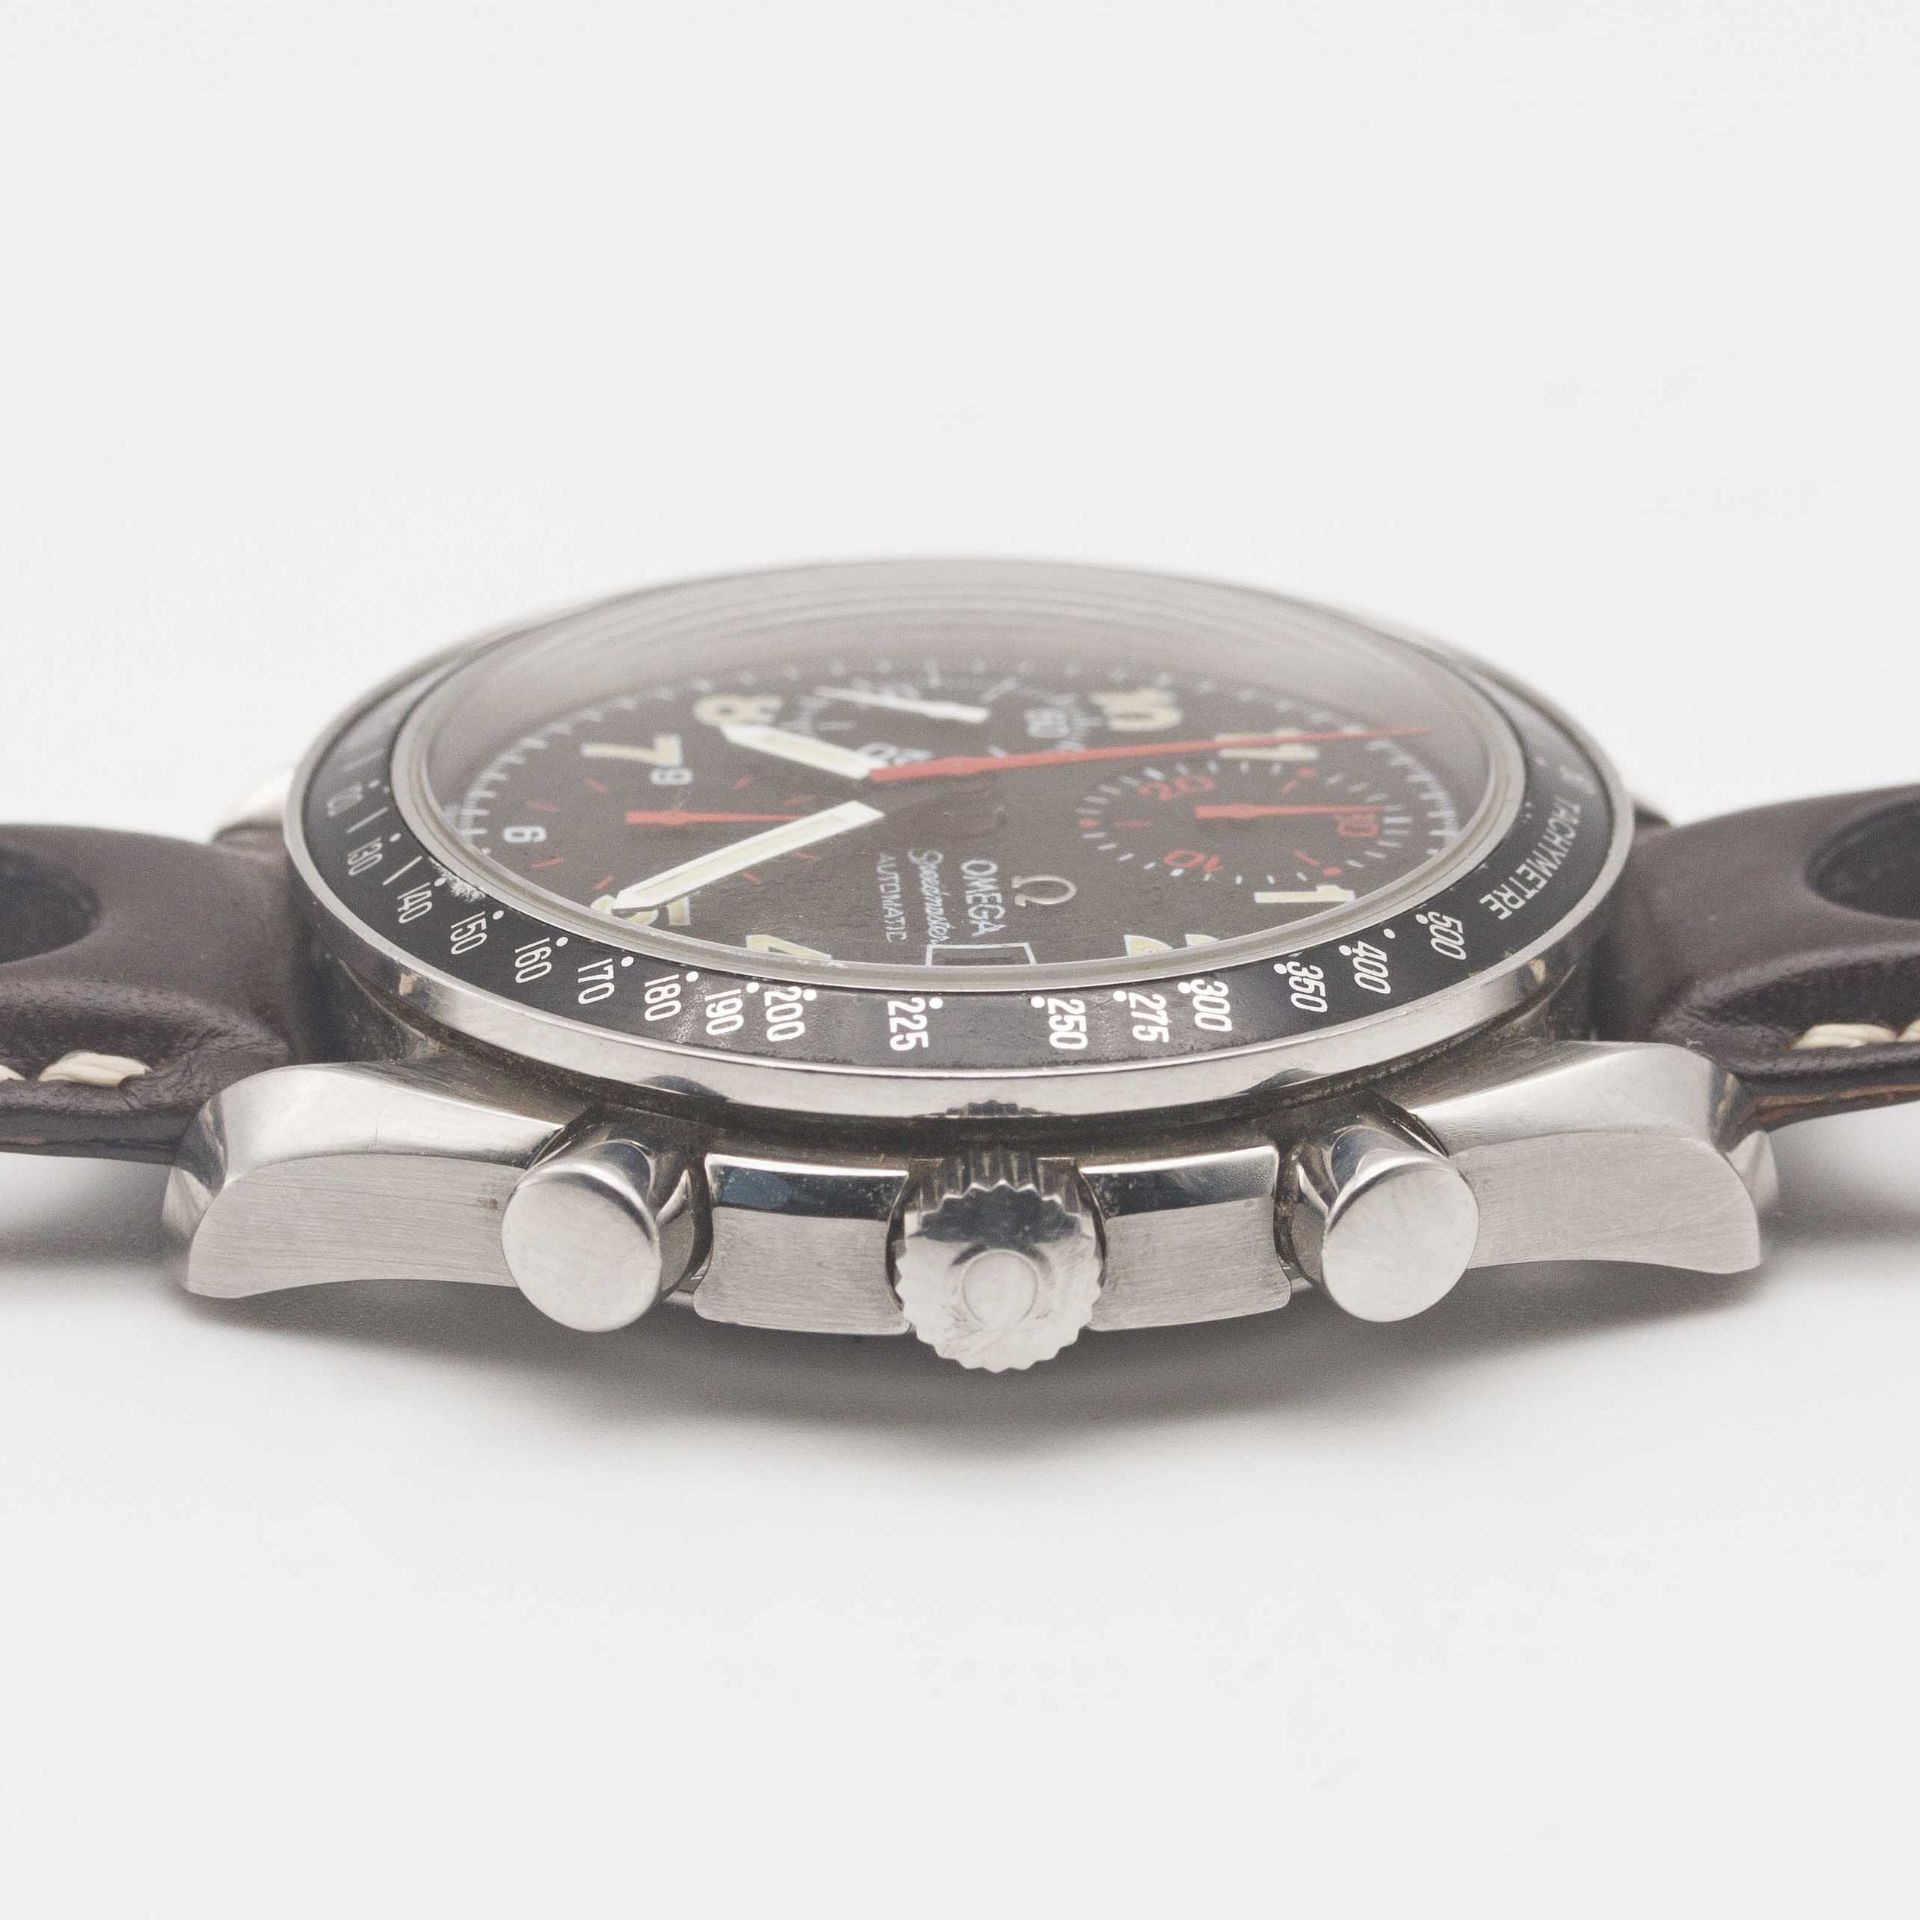 A GENTLEMAN'S STAINLESS STEEL OMEGA SPEEDMASTER AUTOMATIC CHRONOGRAPH WRIST WATCH CIRCA 1999 - Image 8 of 9